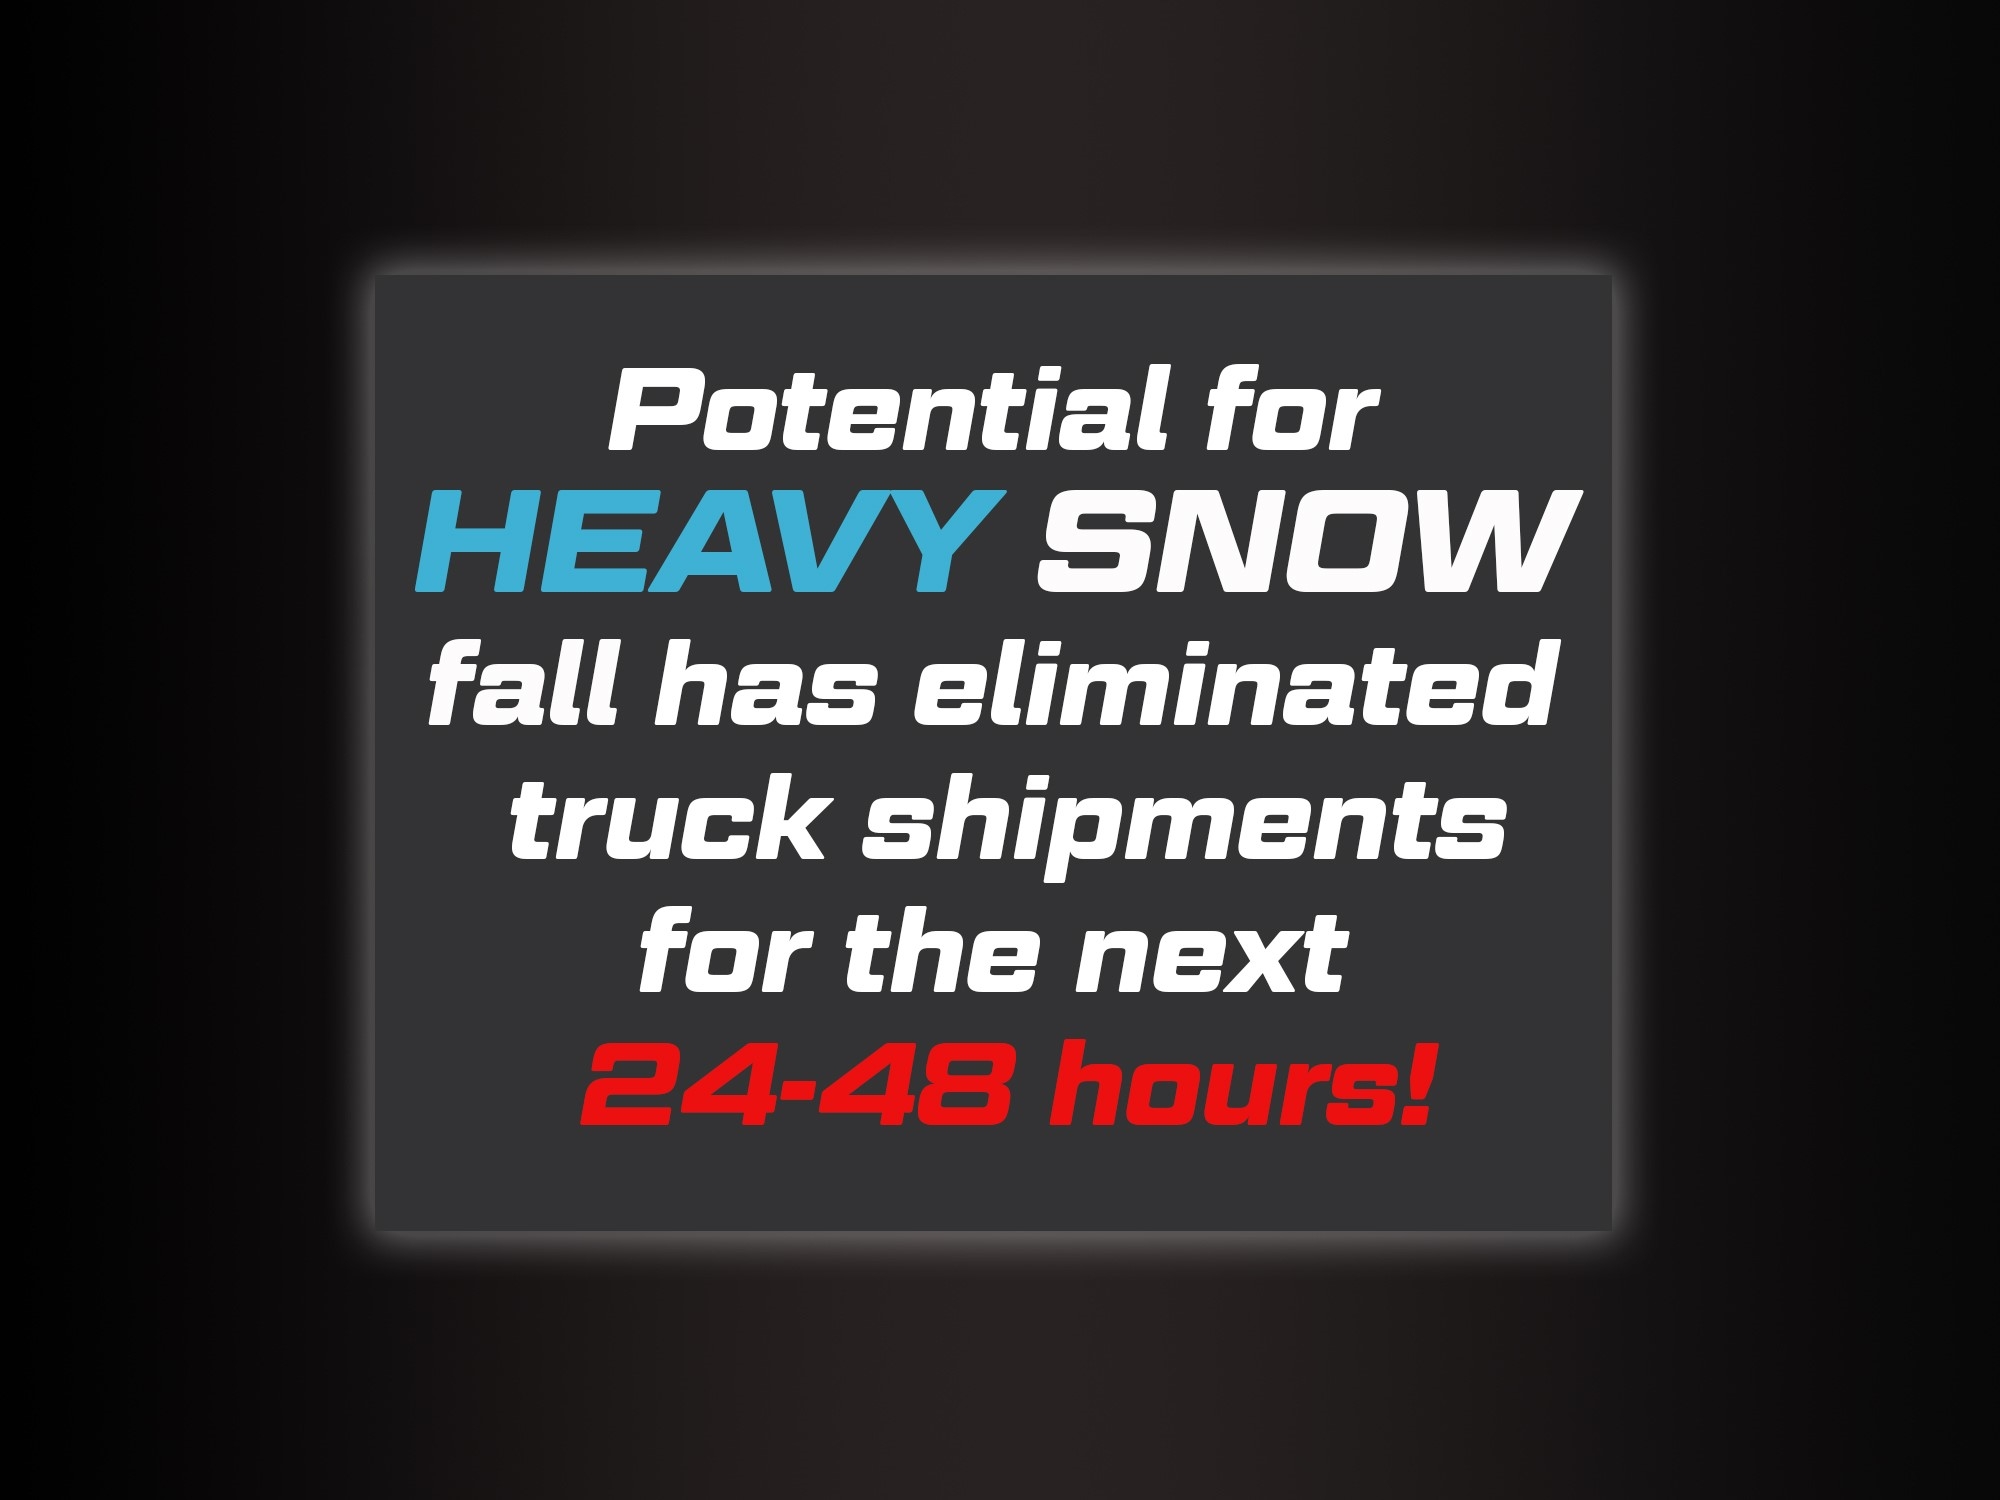 Snow affects truck shipments!